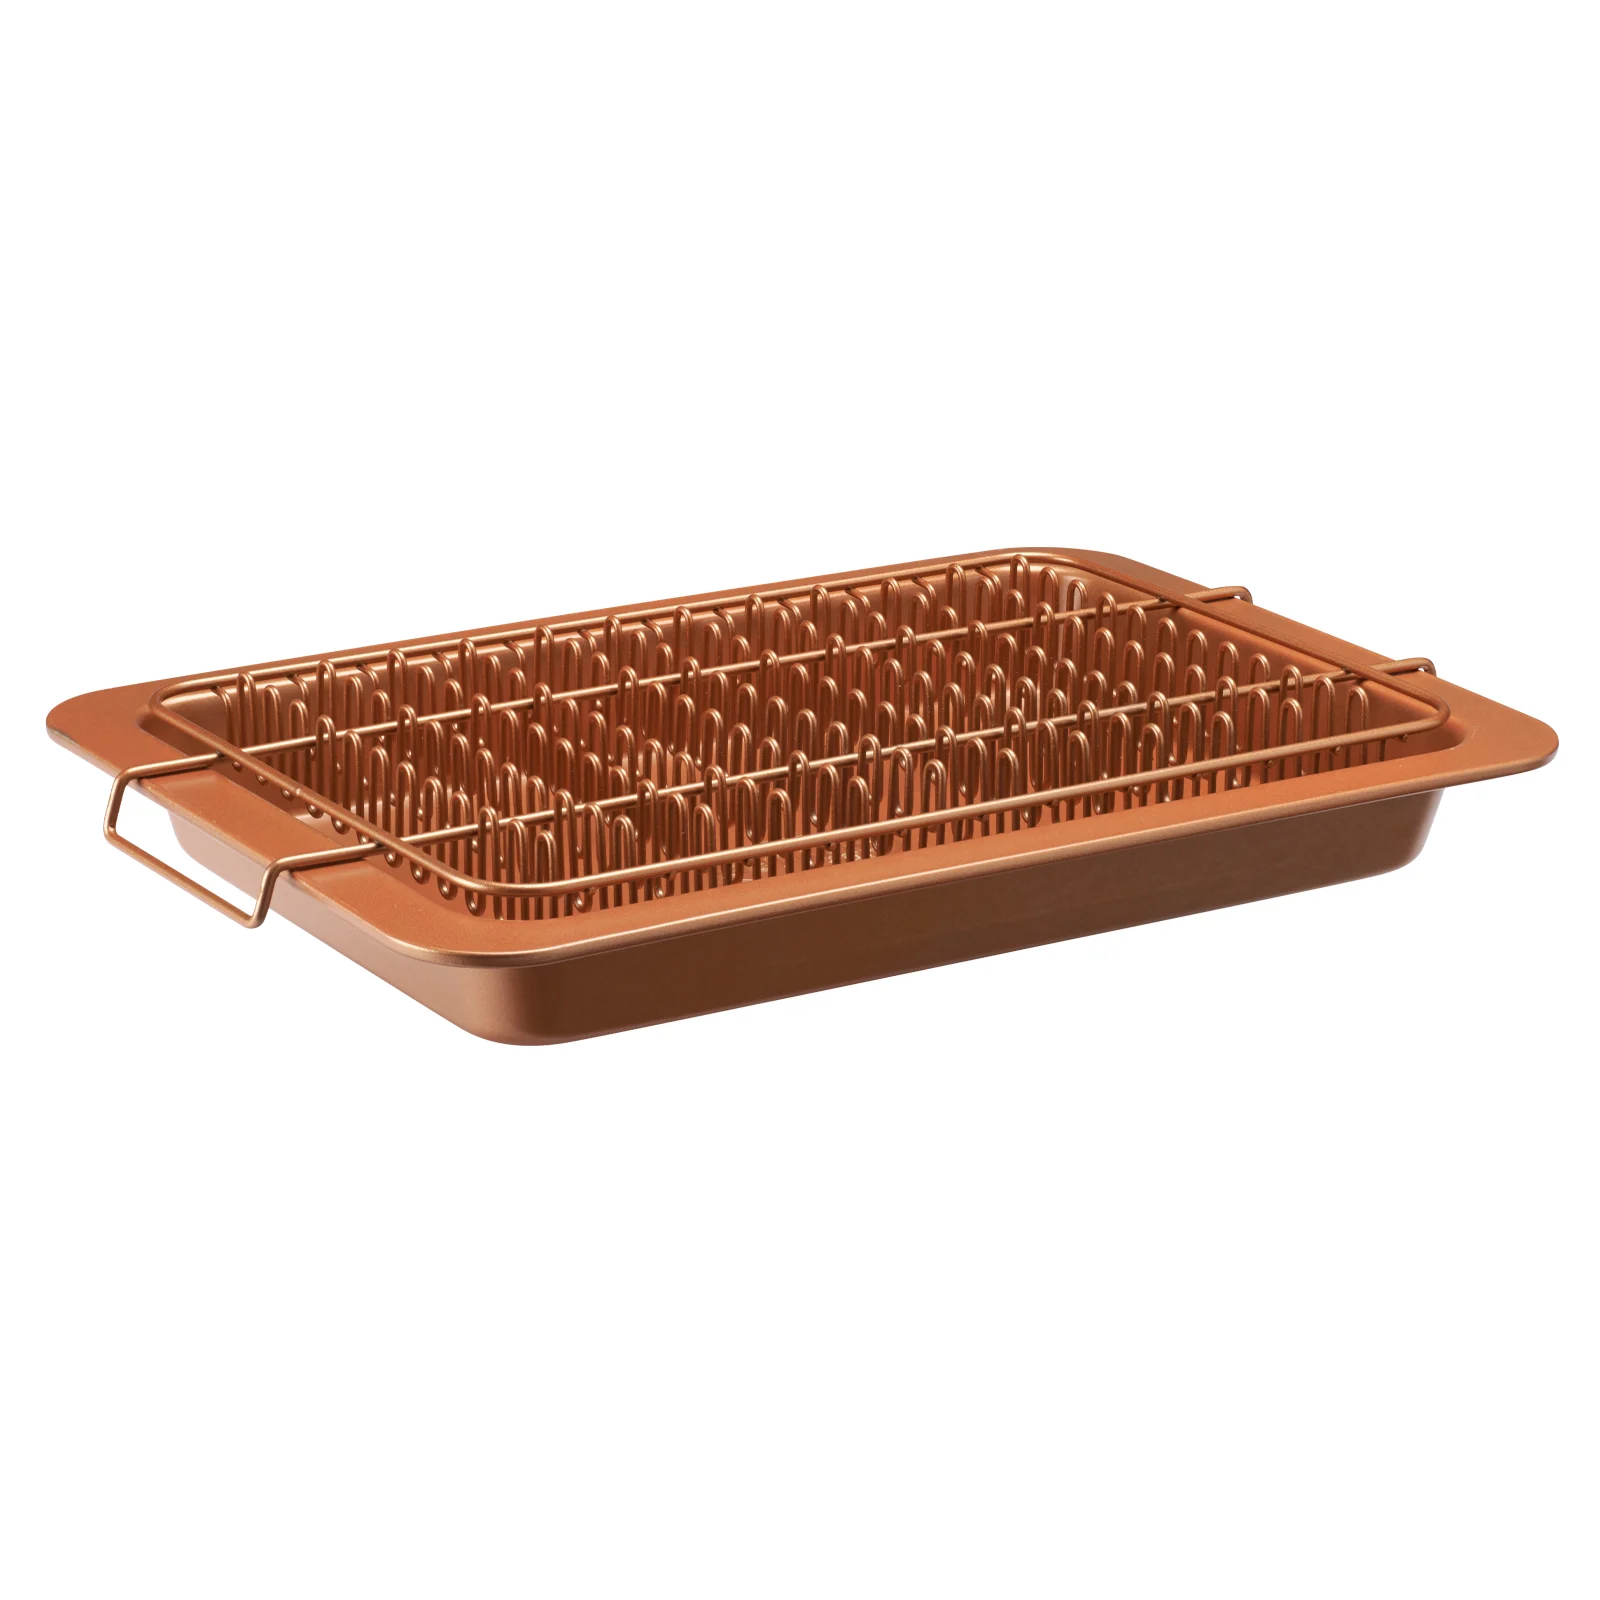 A copper baking tray